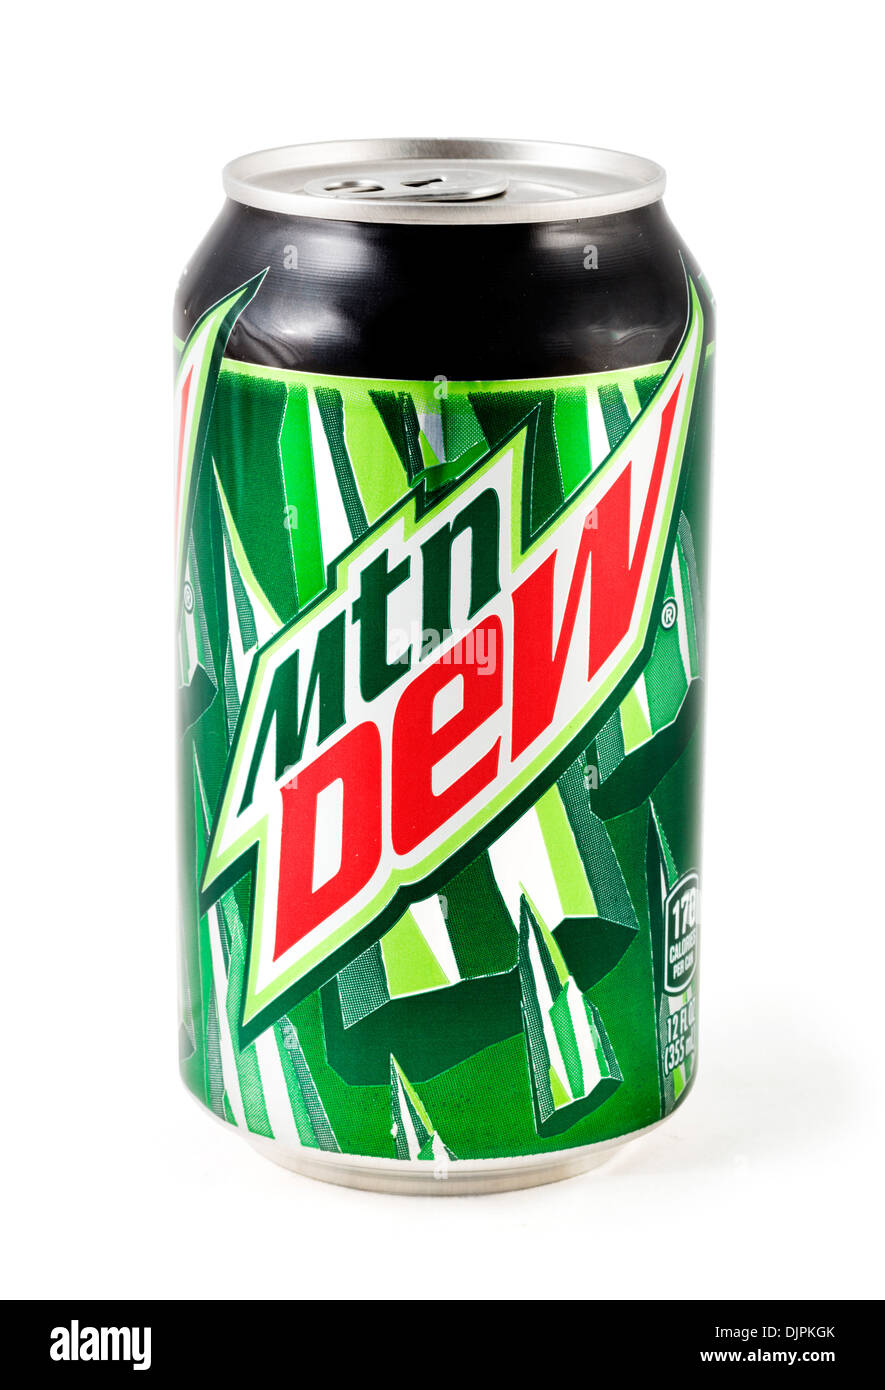 Can of Mtn Dew soda pop, USA Stock Photo